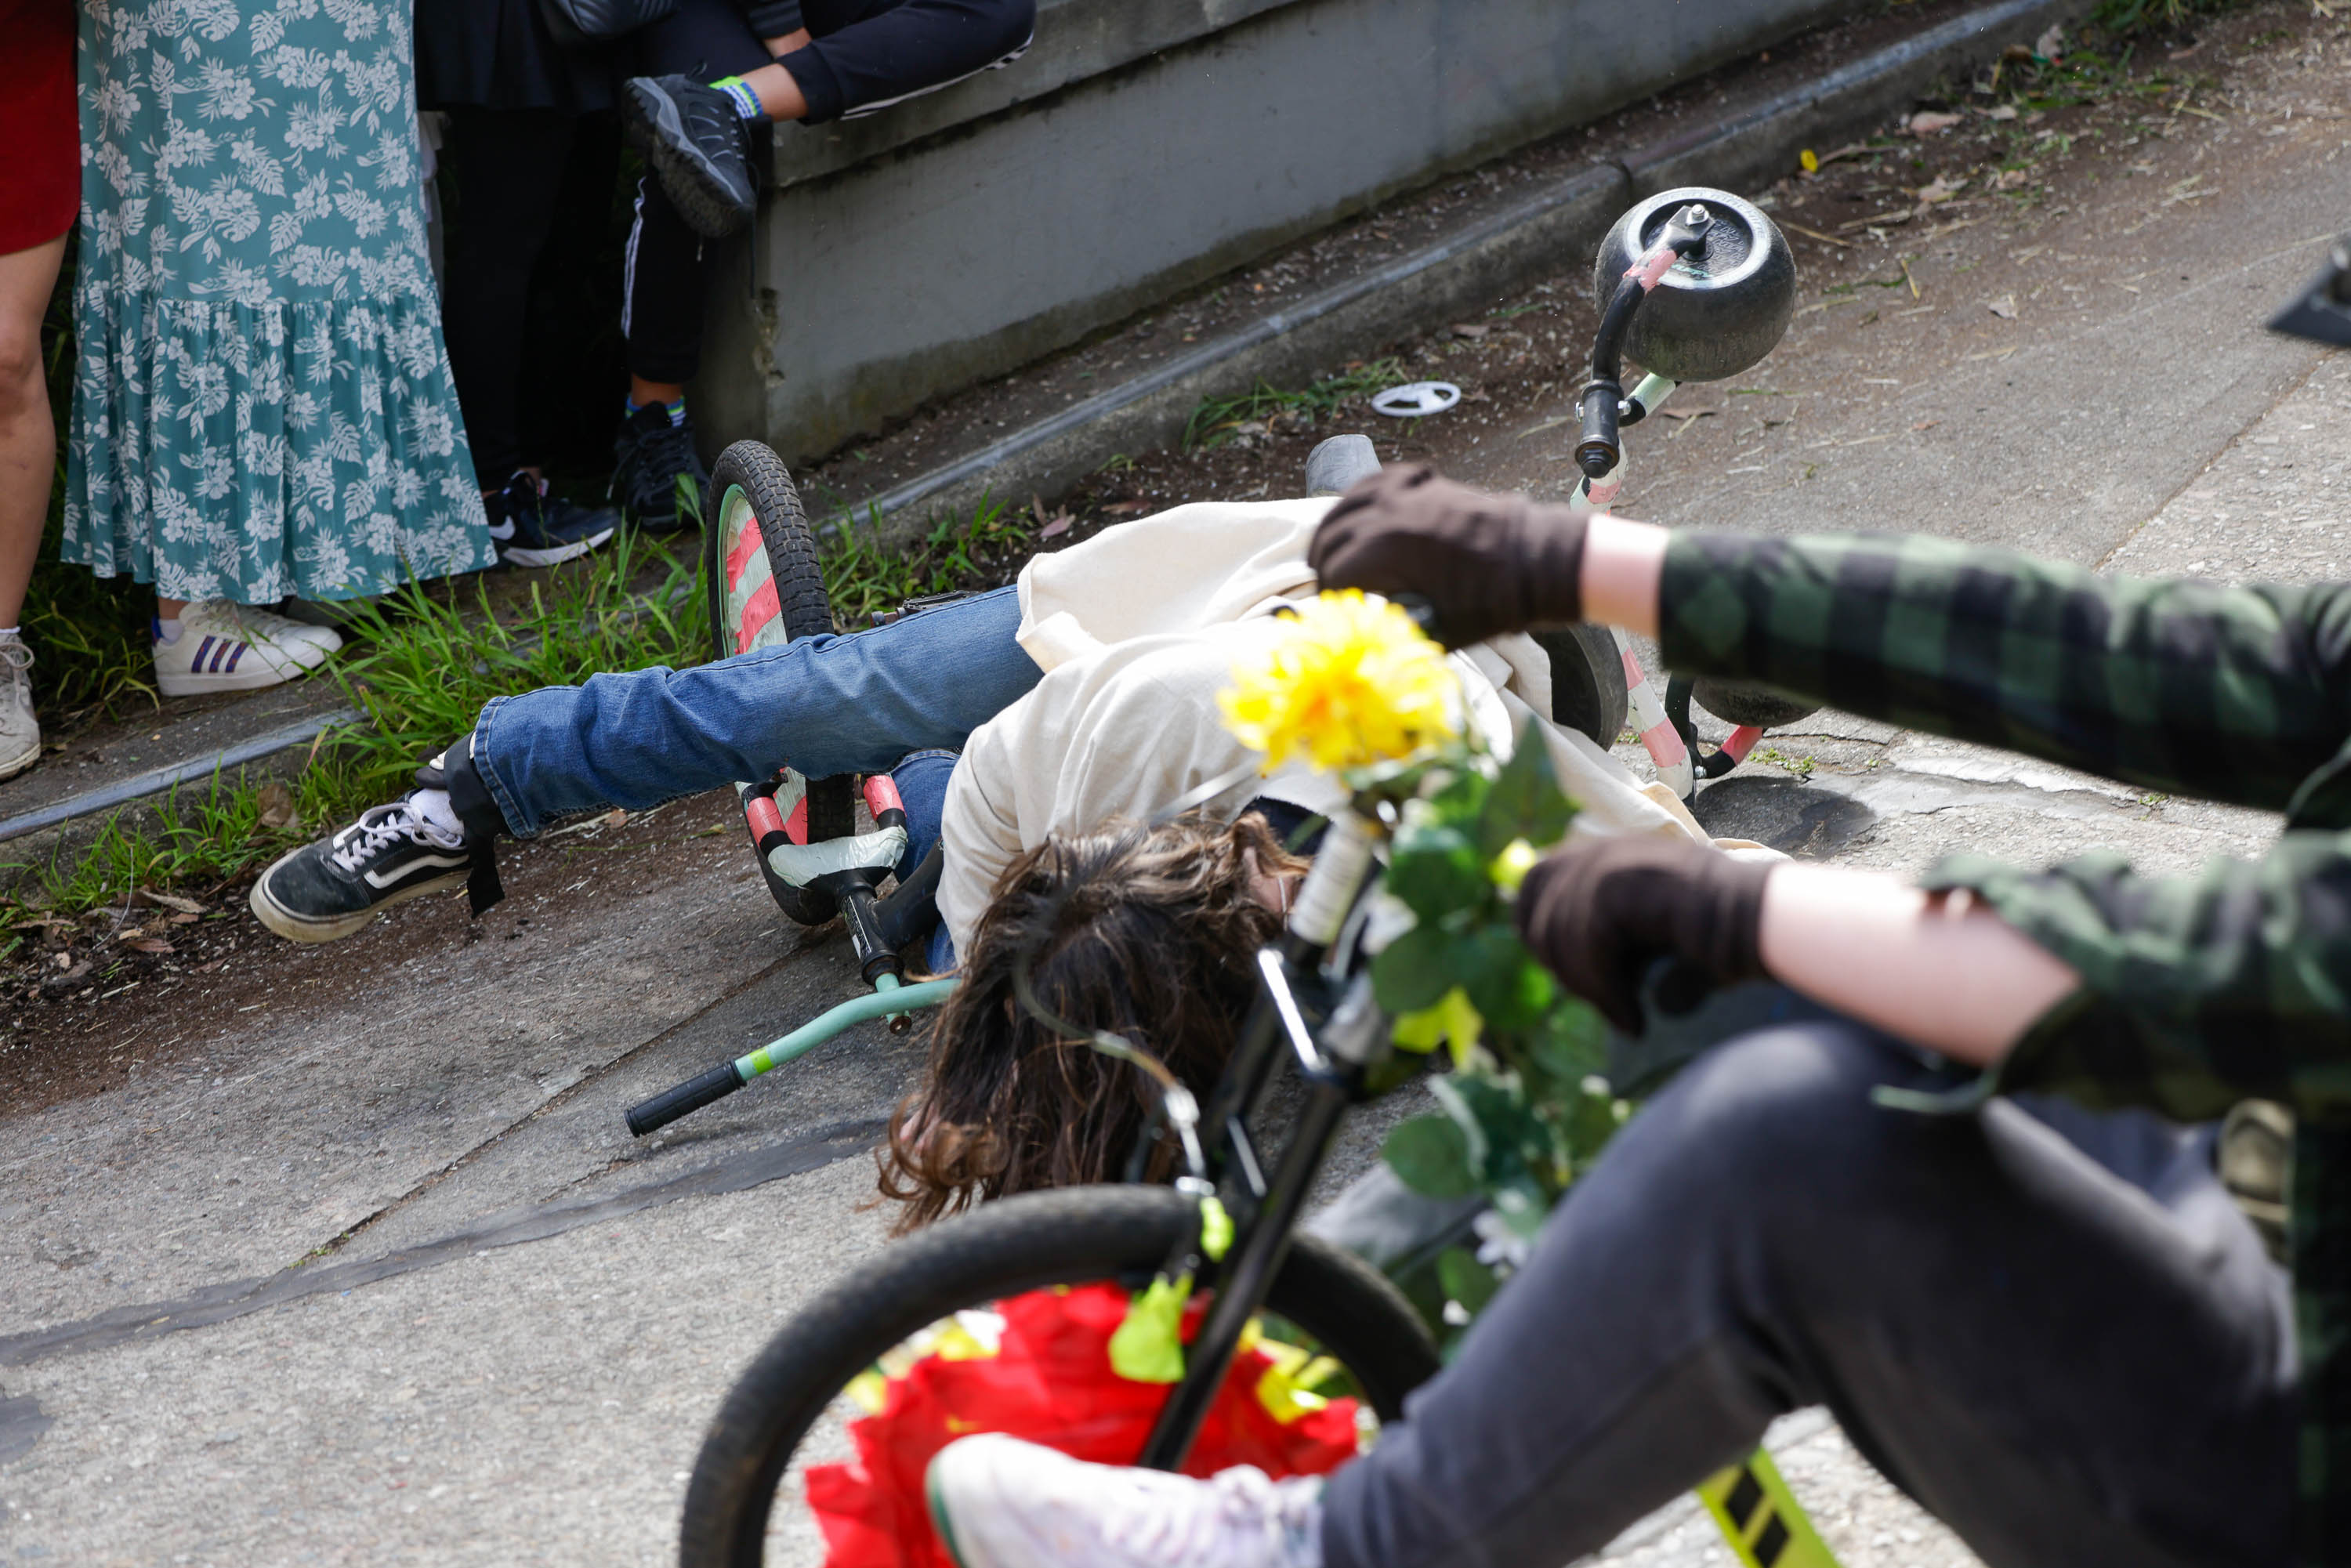 A person lies on the ground beside an overturned bike, with onlookers and flowers visible.